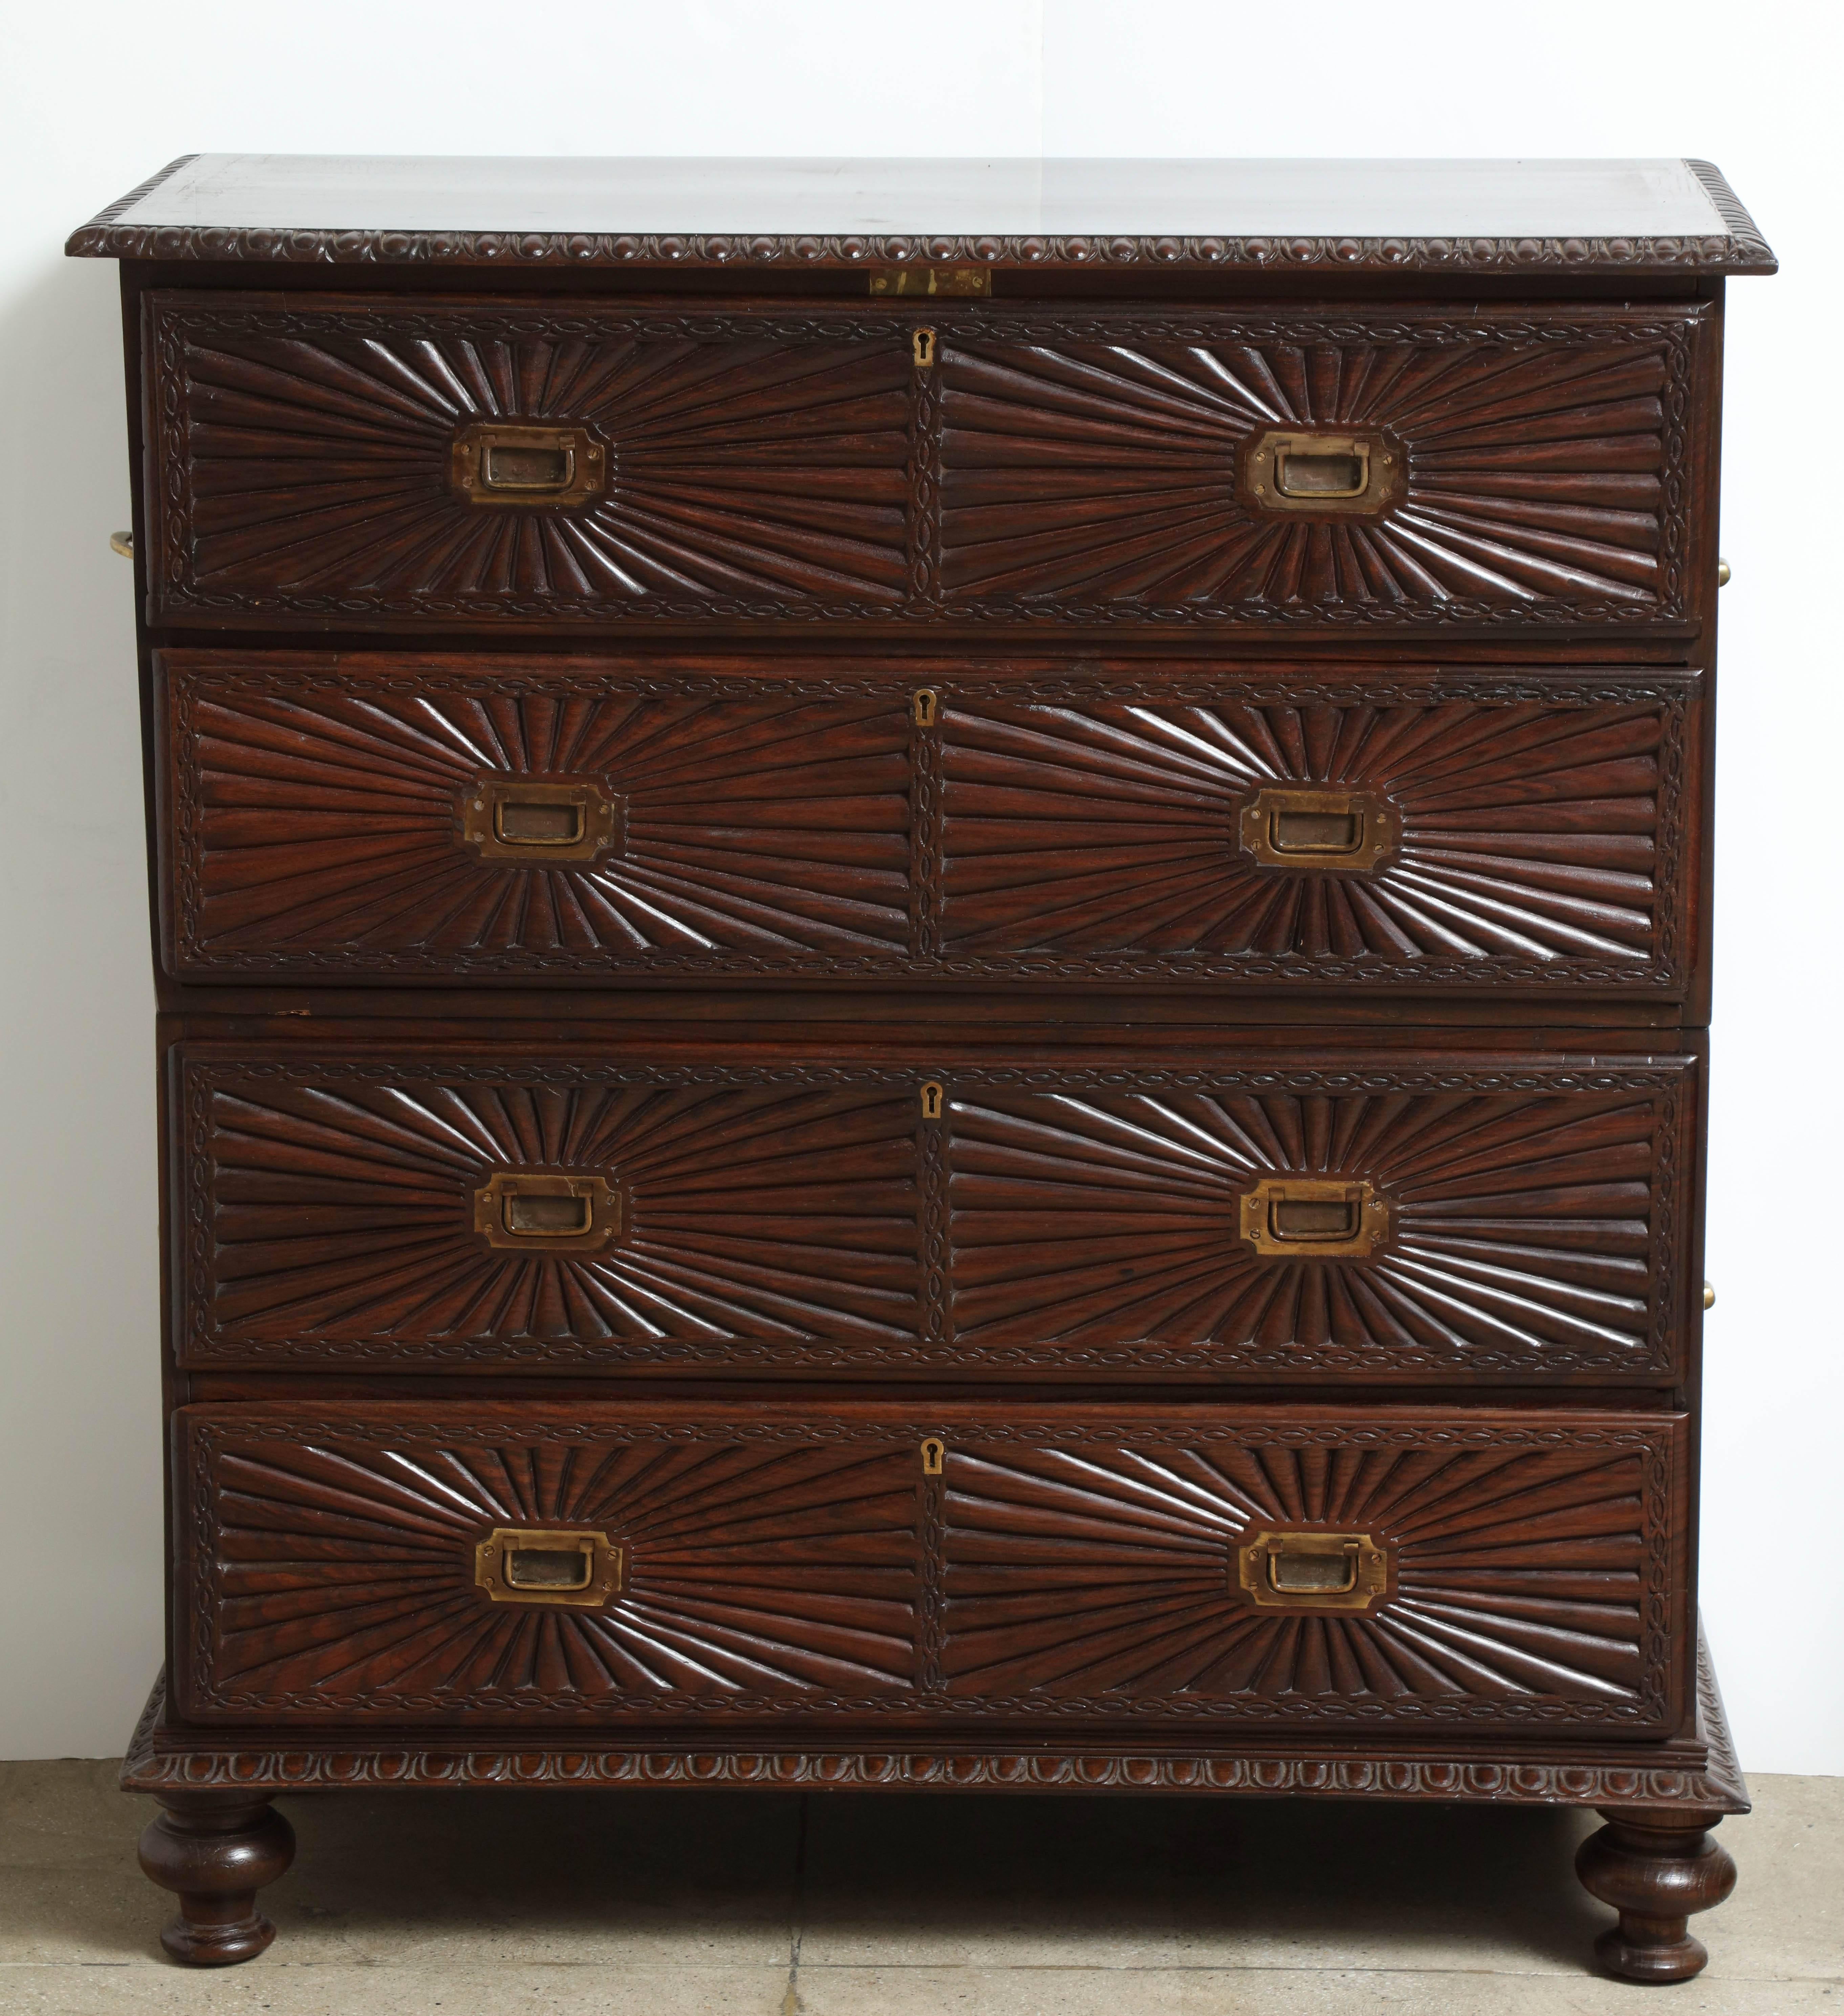 The chest is in rosewood with sunburn pattern.
The top is a secretary on a two-drawer chest.

 